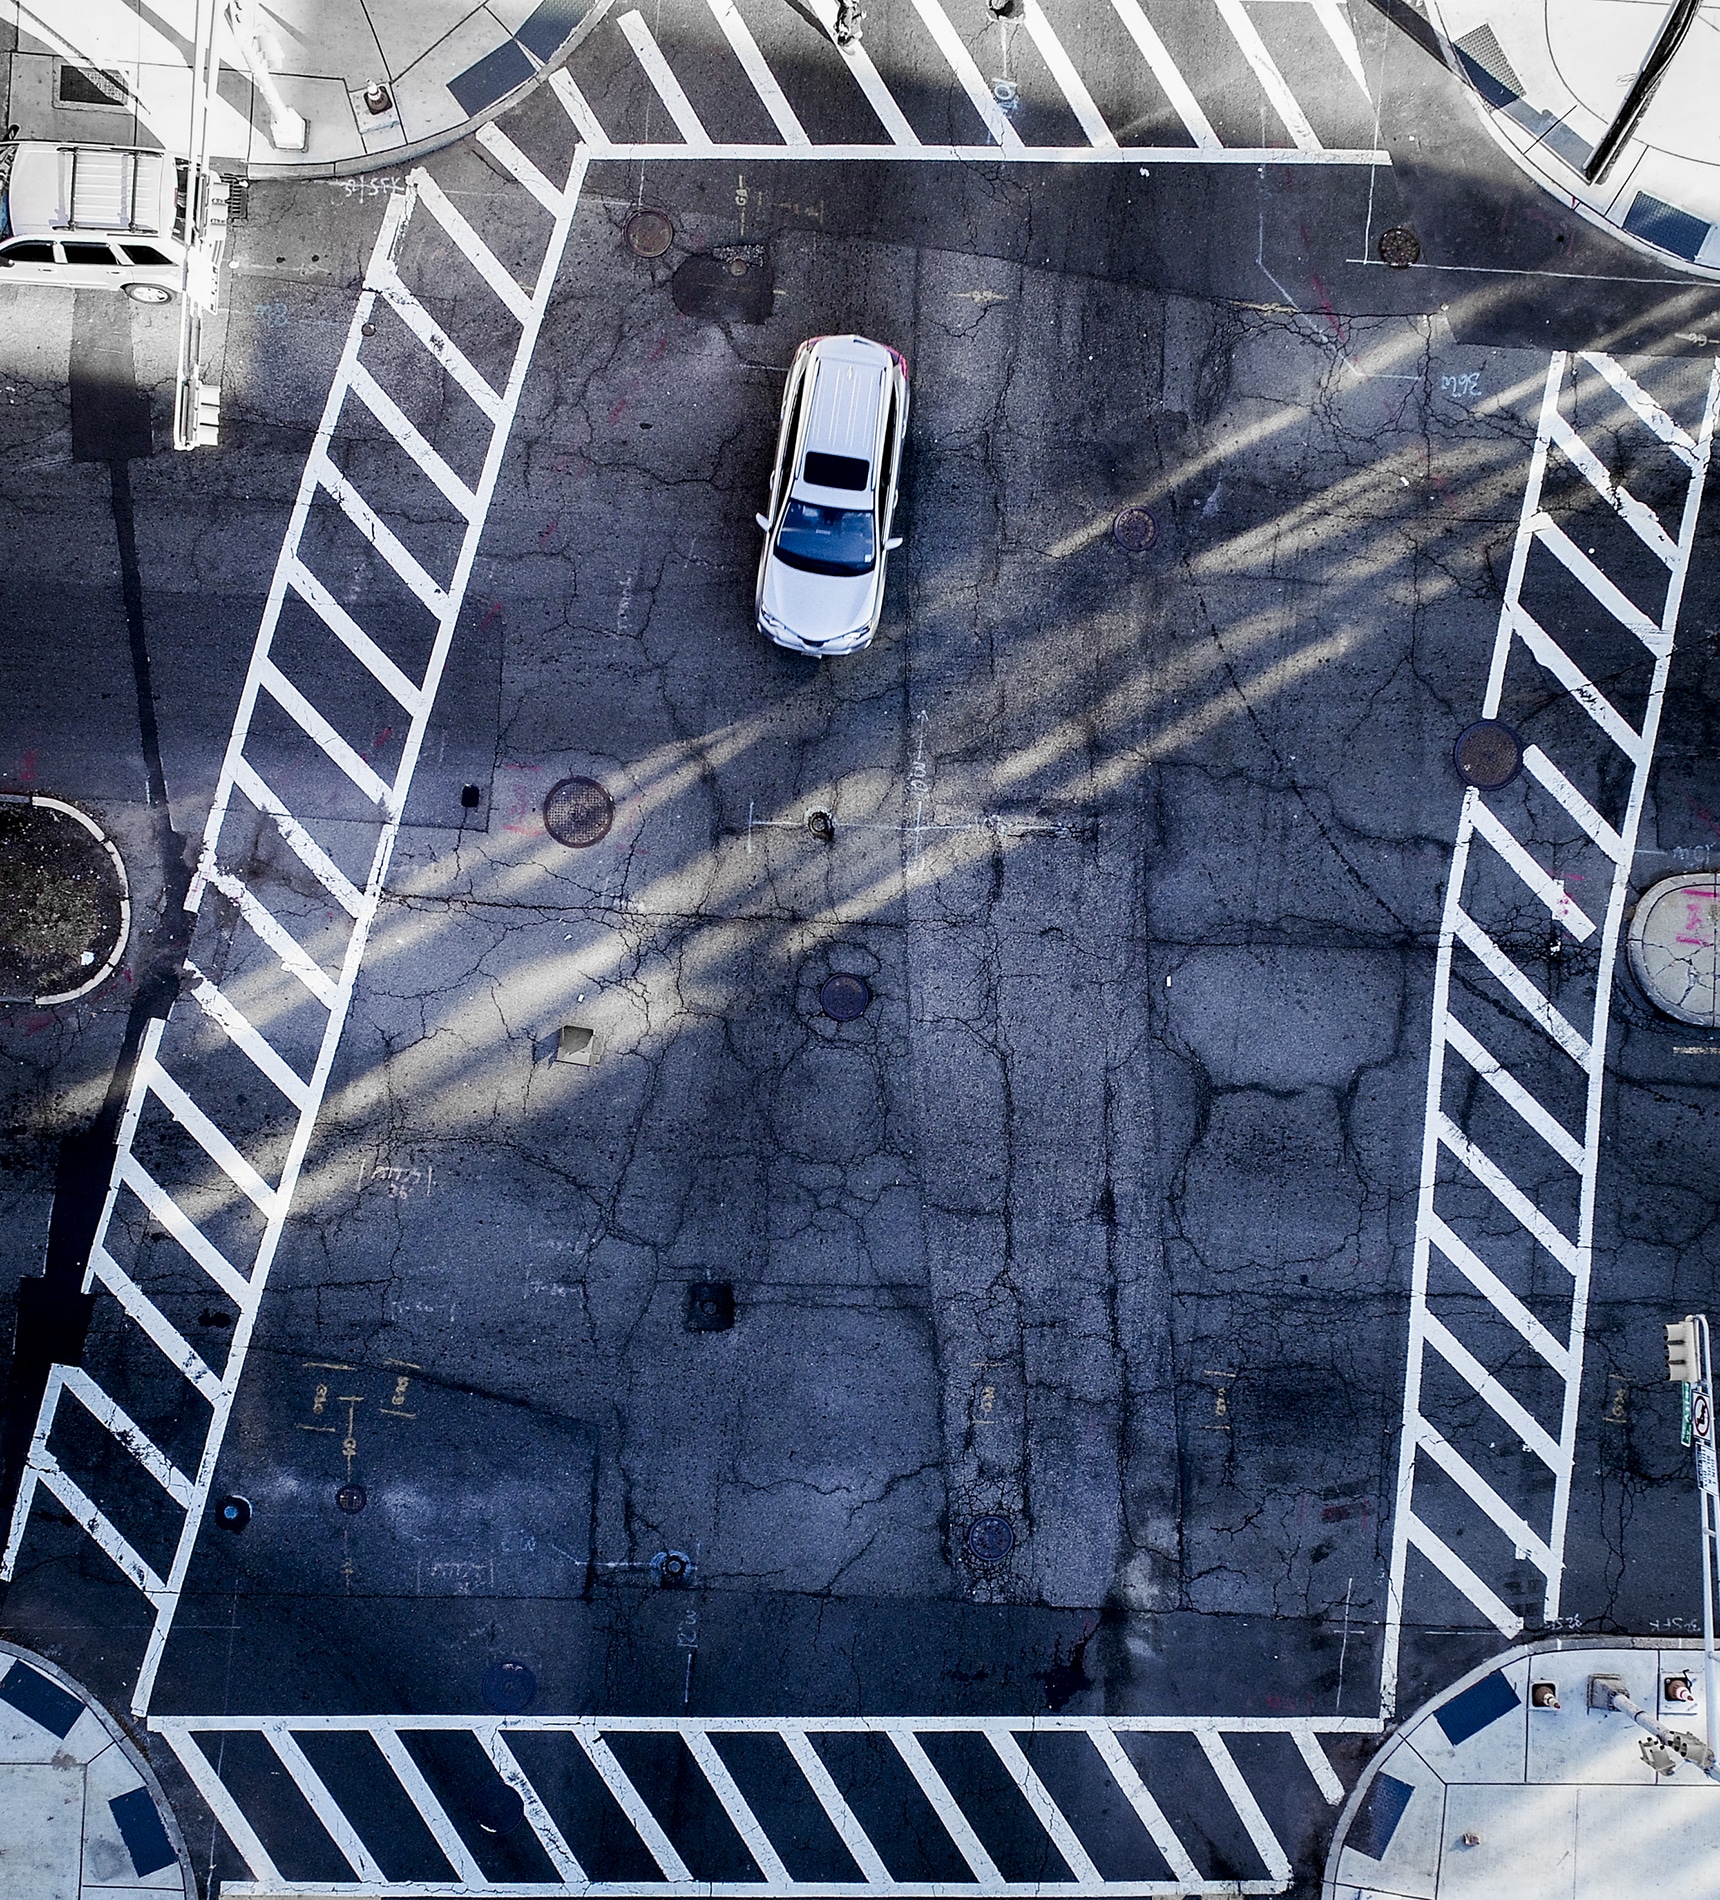 Drone Photograph taken of a car in an intersection in Newark New Jersey